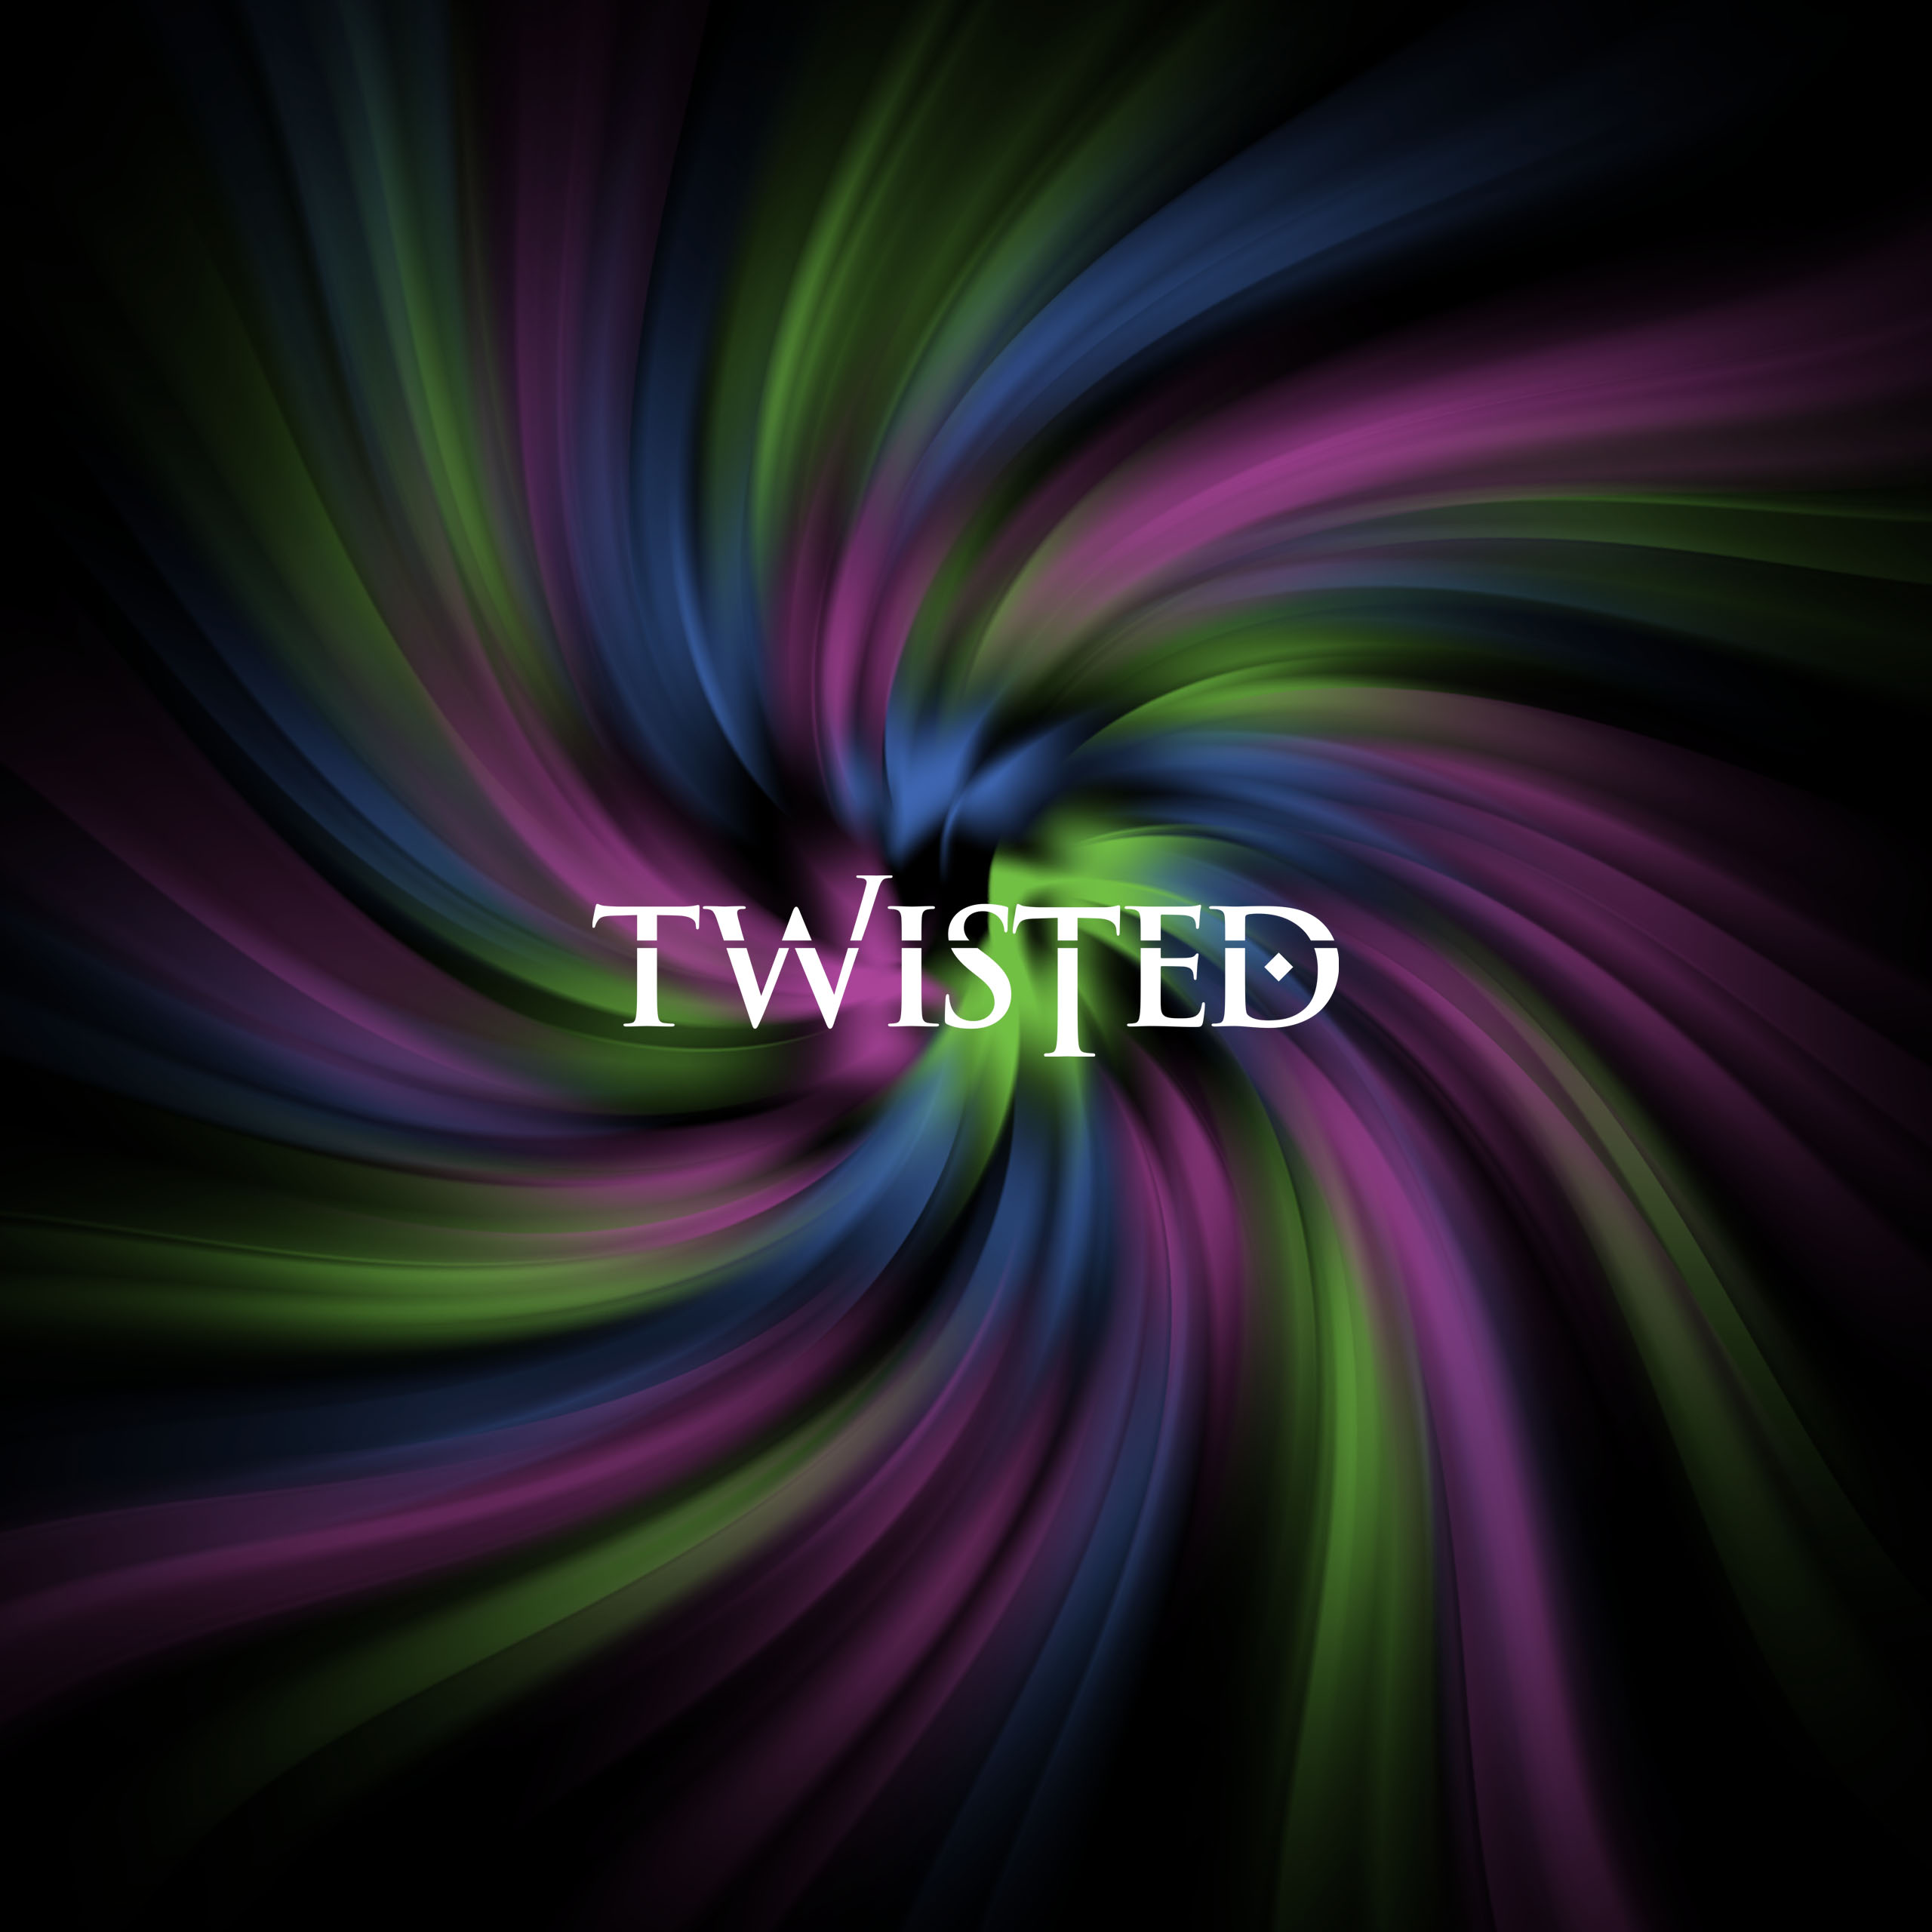 Twisted Wallpapers For Phone - HD Wallpaper 